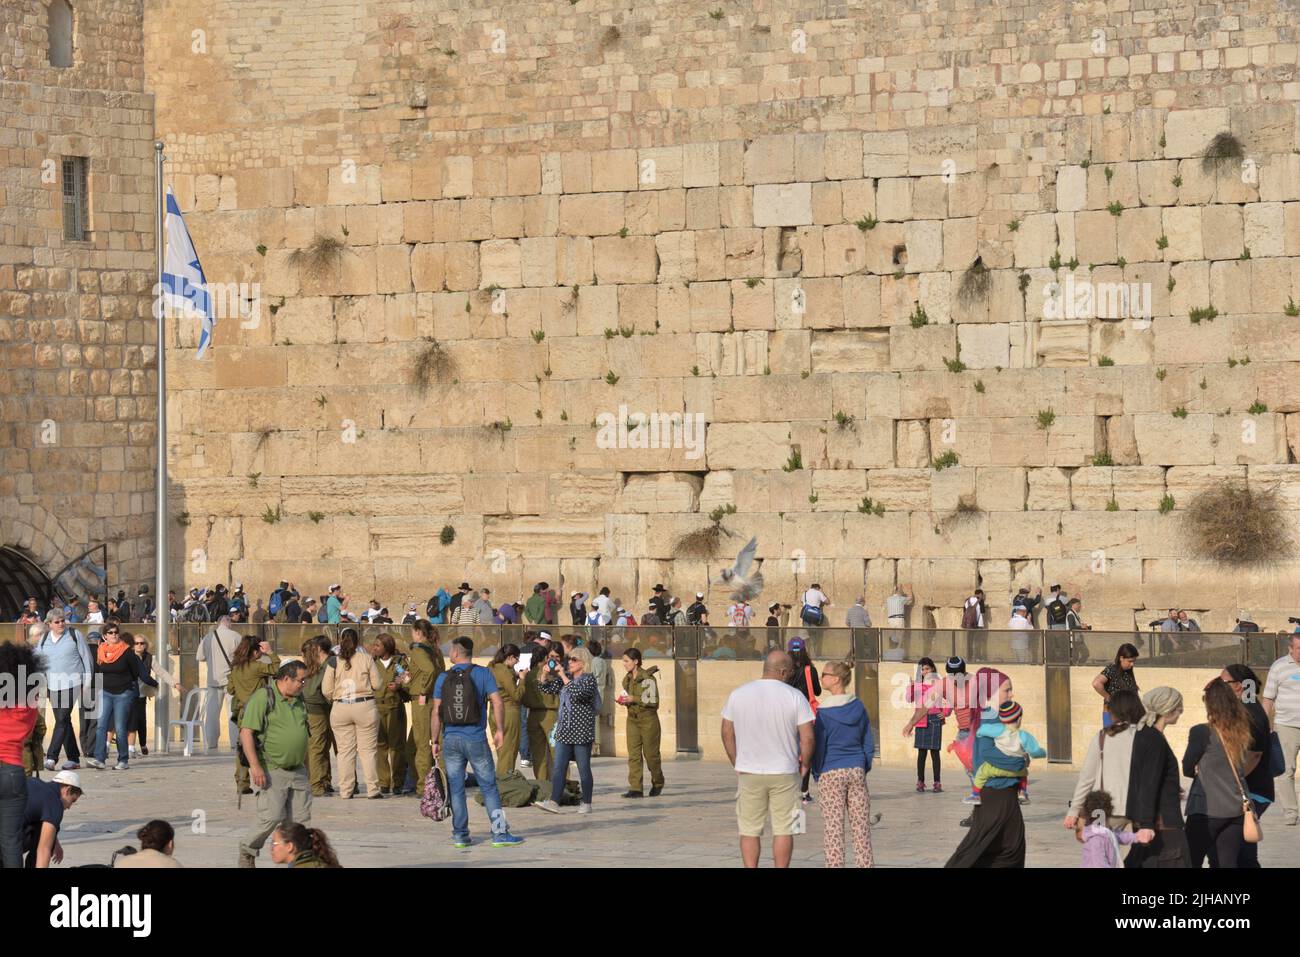 Jerusalem, Israel - March 20, 2014: Jews pray under the Western Wall in the Old city. The Old City is listed as UNESCO World Heritage site since 1981 Stock Photo